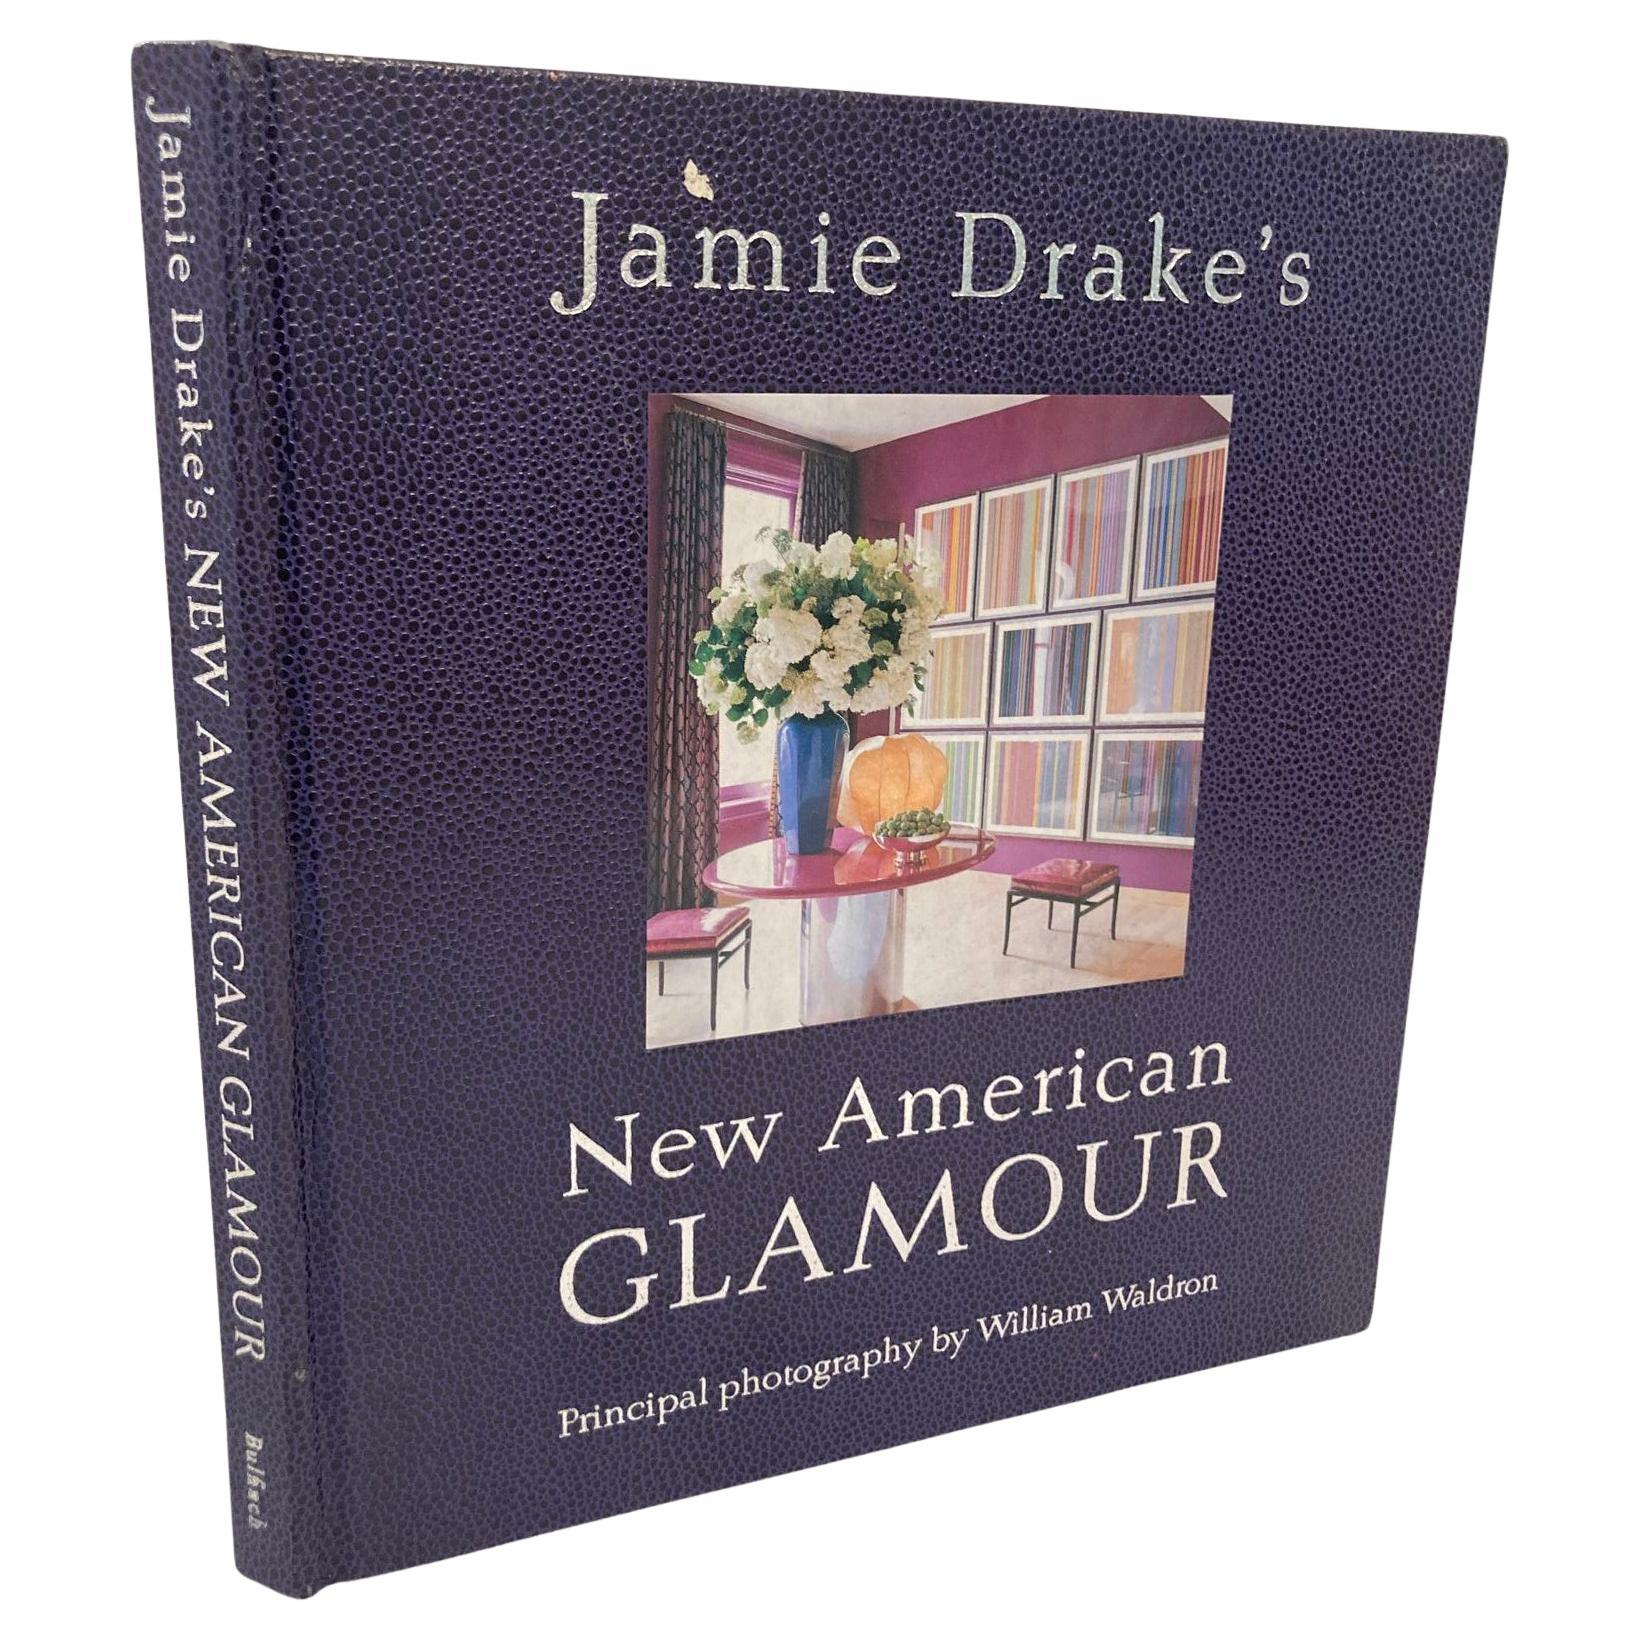 Jamie Drake's New American Glamour, First Edition Hardcover Book